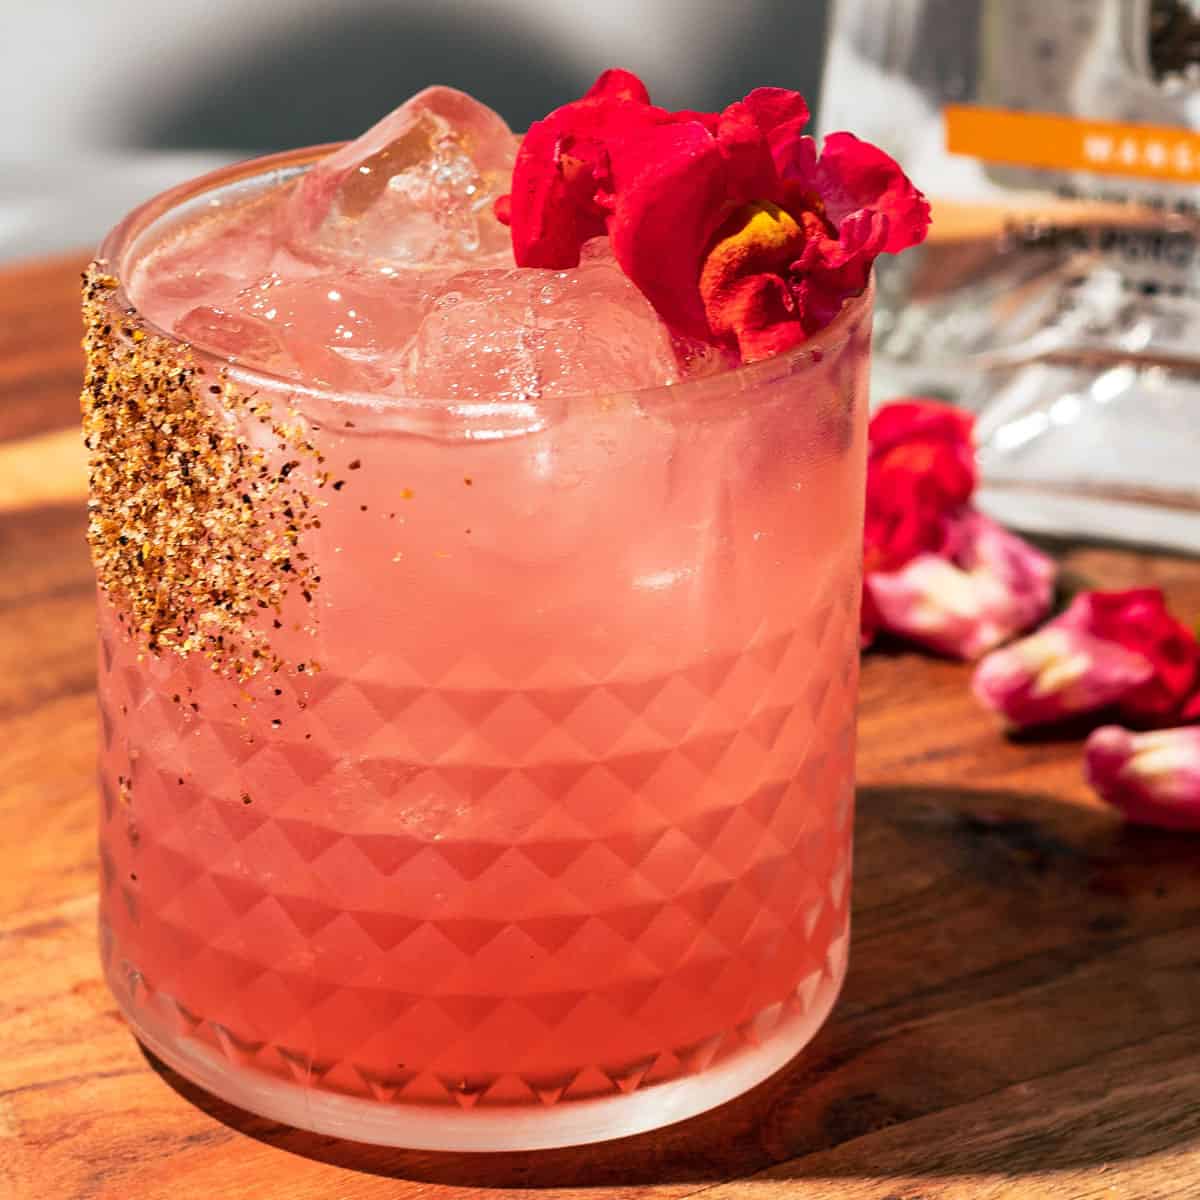 The hibiscus margarita garnished with a pink edible flower and a tajin rim.